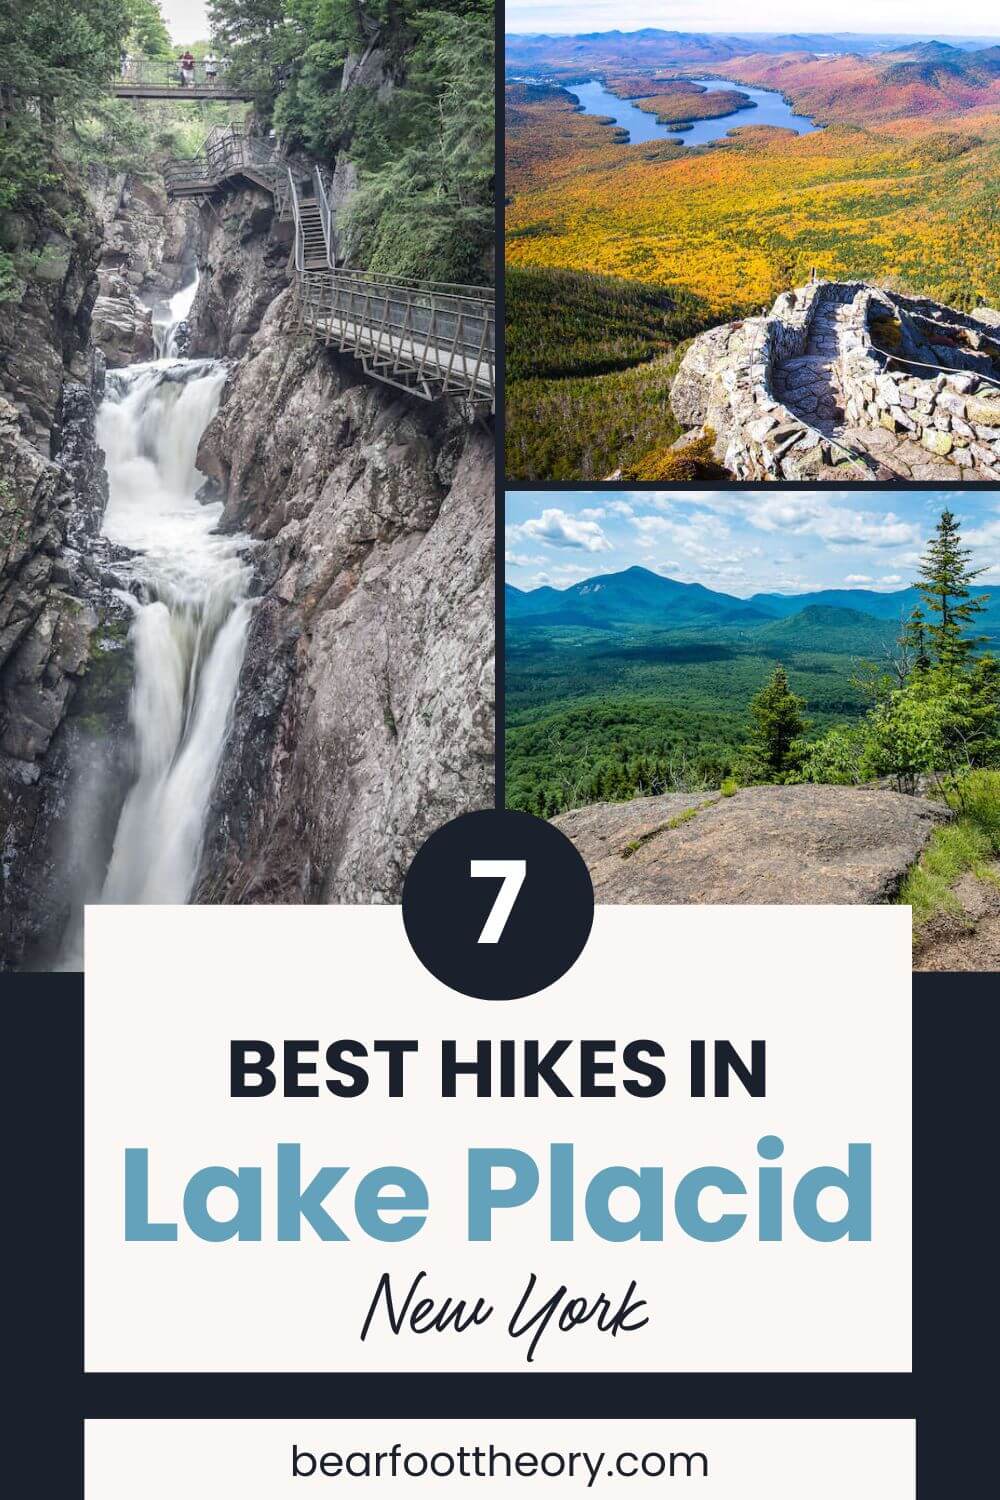 Bearfoot Theory | Embark on the ultimate Lake Placid hiking experience! This latest blog post guides you through the most breathtaking trails around Lake Placid, nestled in the heart of the Adirondacks. Whether you're a beginner looking for serene lakeside strolls or an adventurer seeking mountain summits with panoramic views, we've got you covered. Dive into our curated list, grab your hiking boots, and get ready to be enchanted by New York's natural beauty. Pin now and plan your next hiking escape!